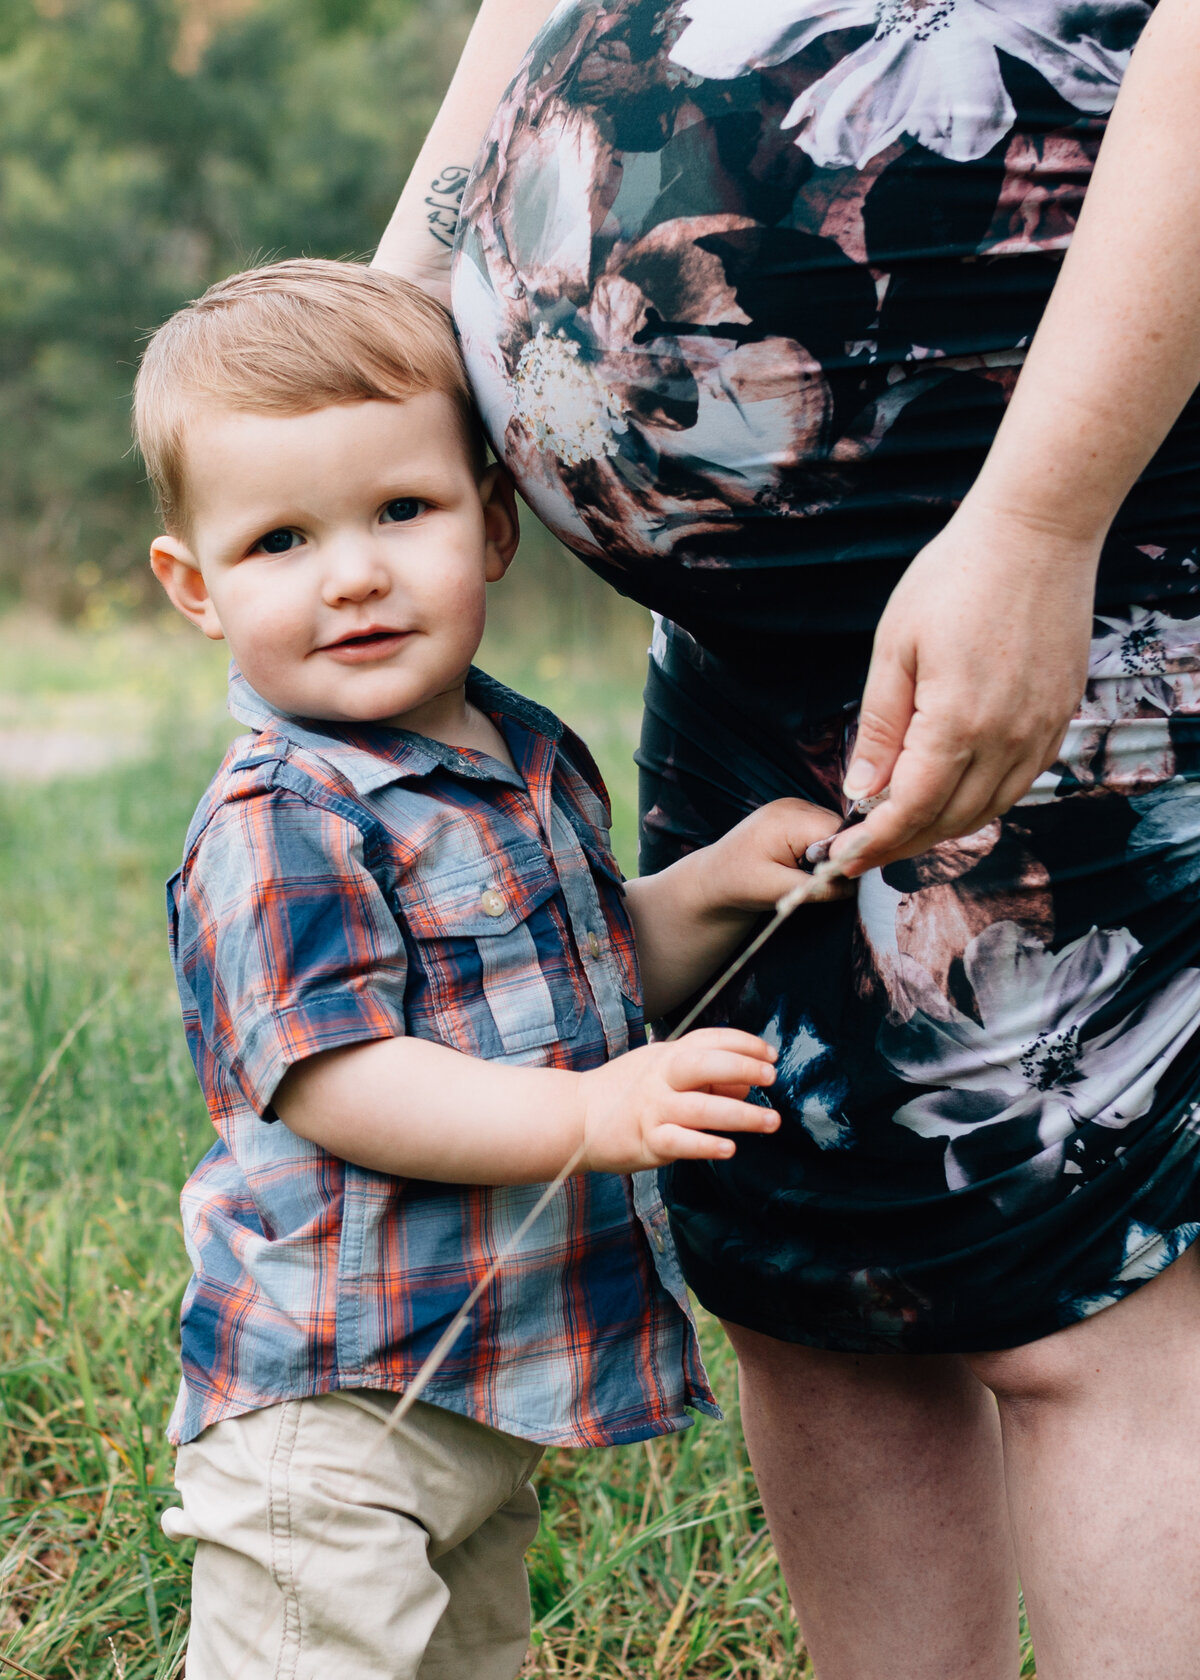 Young son looking at  camera, standing next to mother's belly during outdoor maternity session.